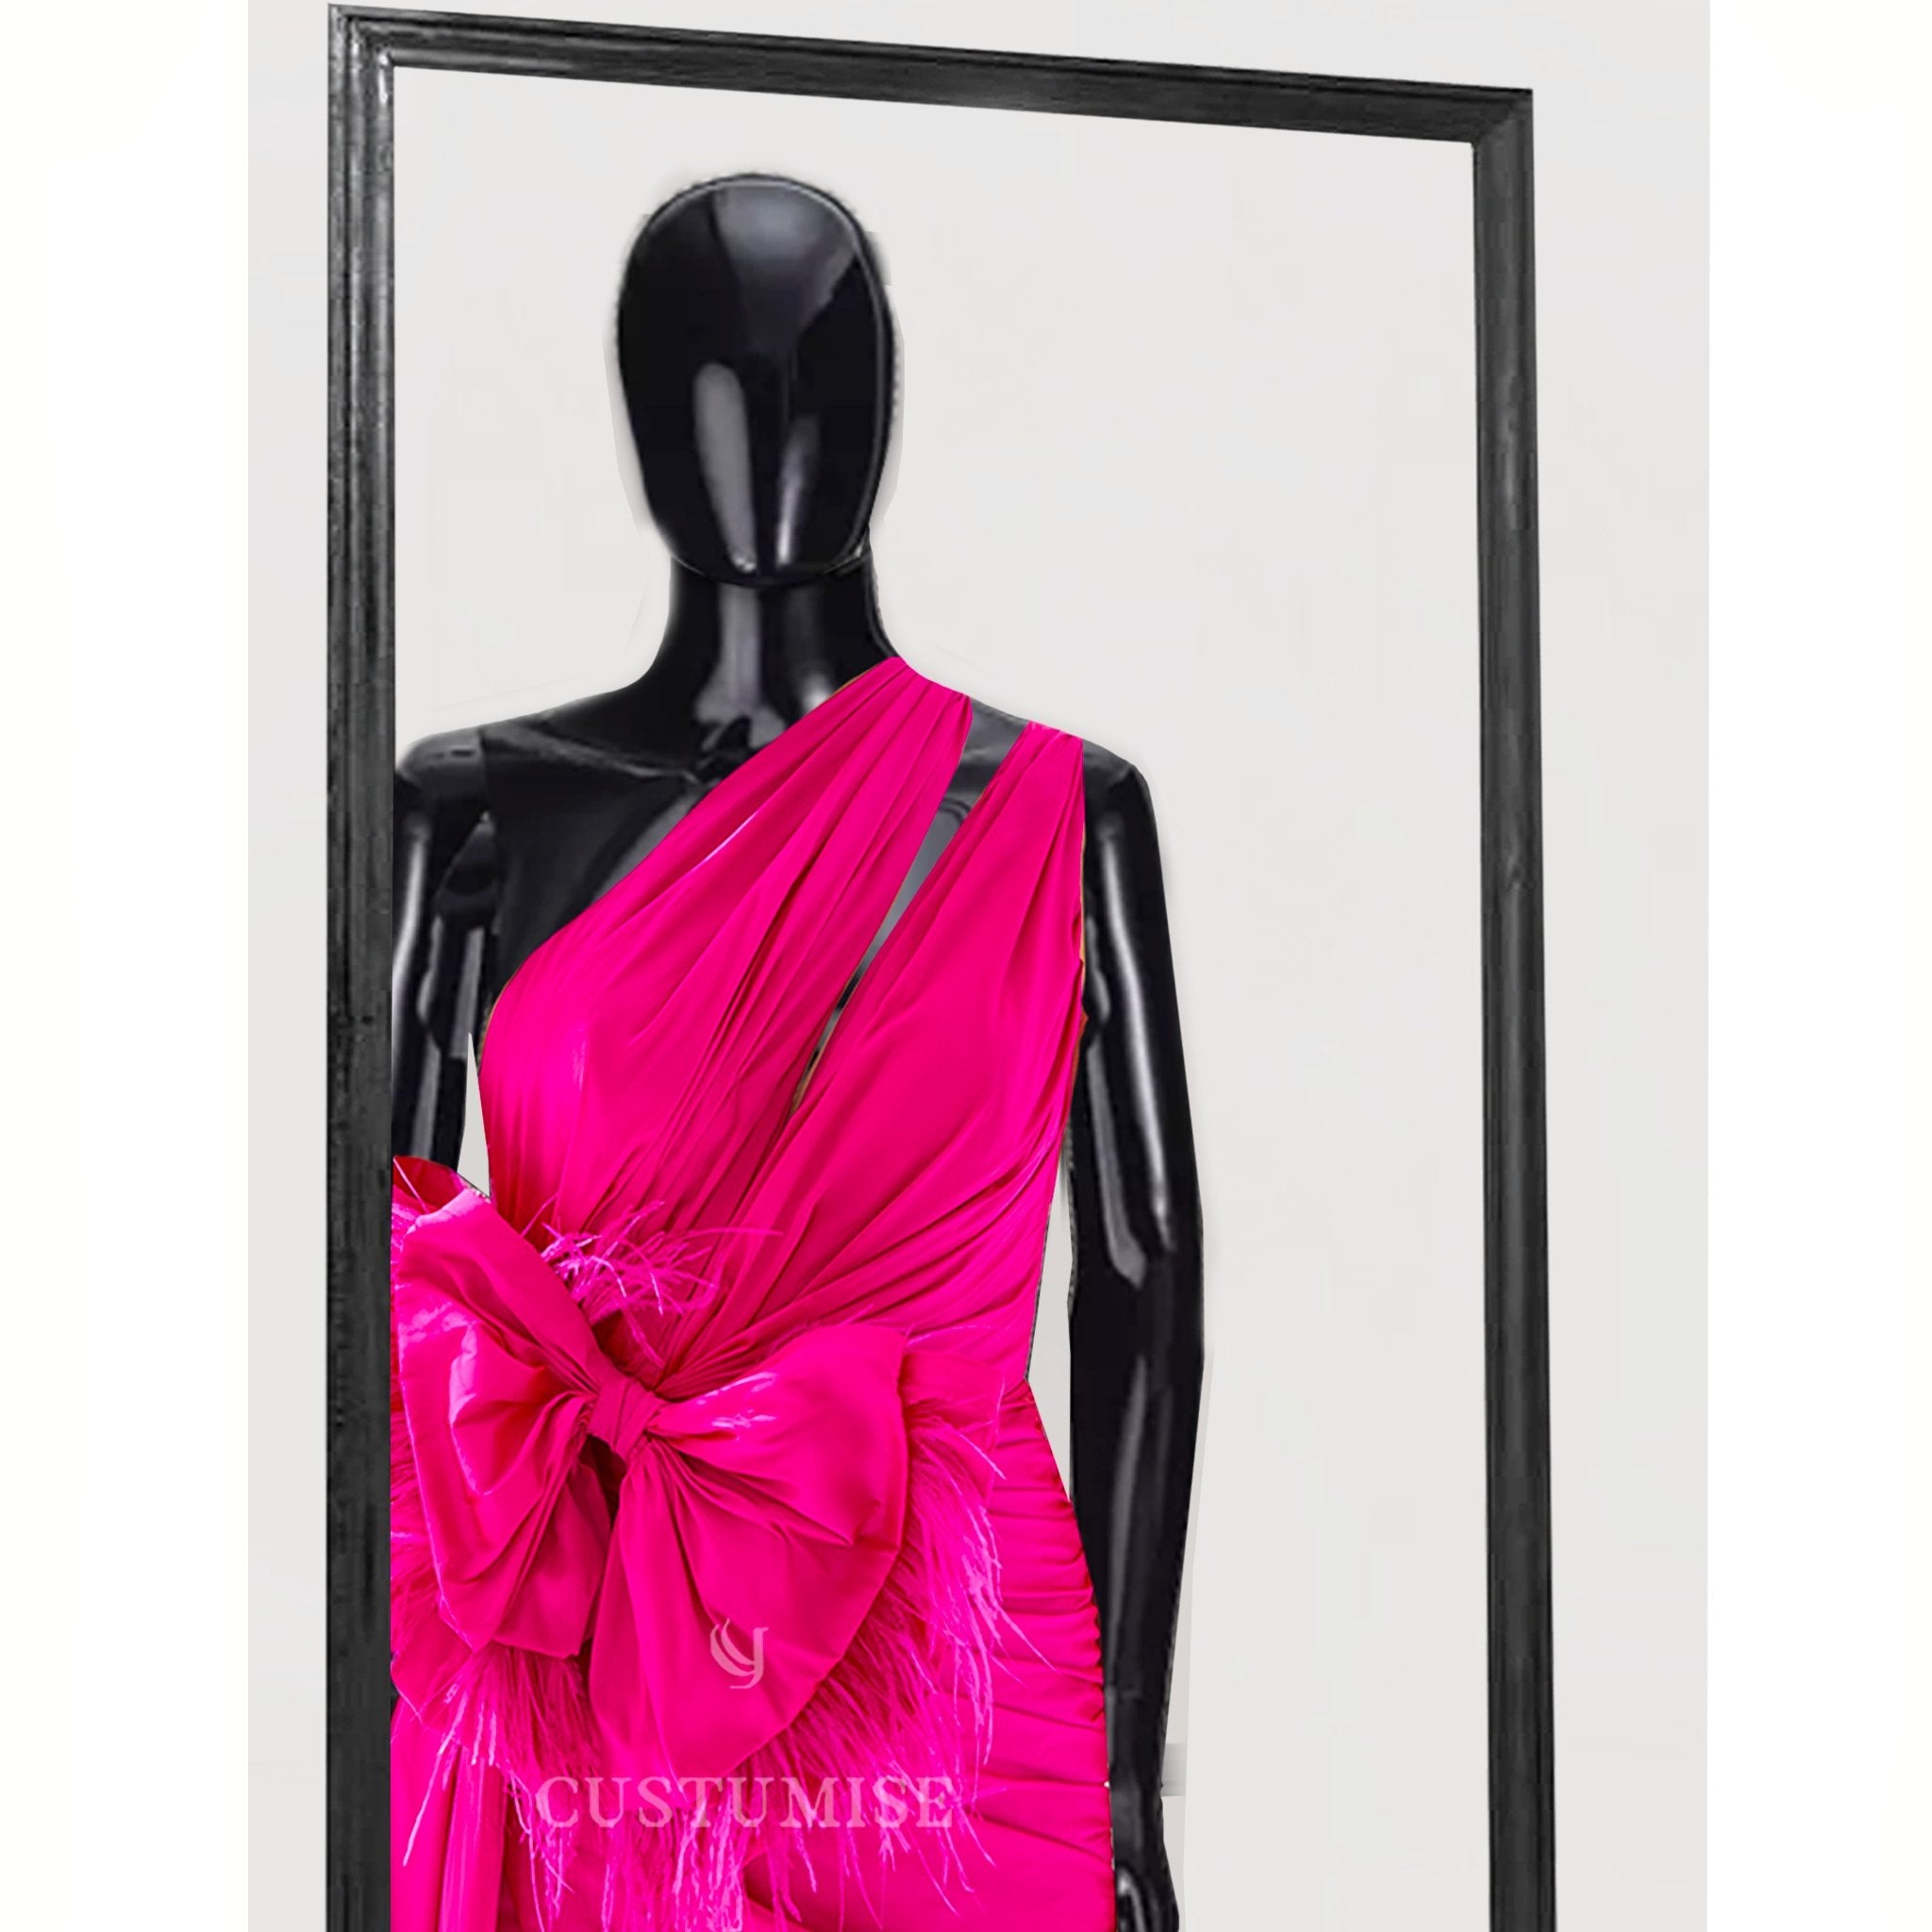 Hot pink gown with bow - Indian Designer Bridal Wedding Outfit